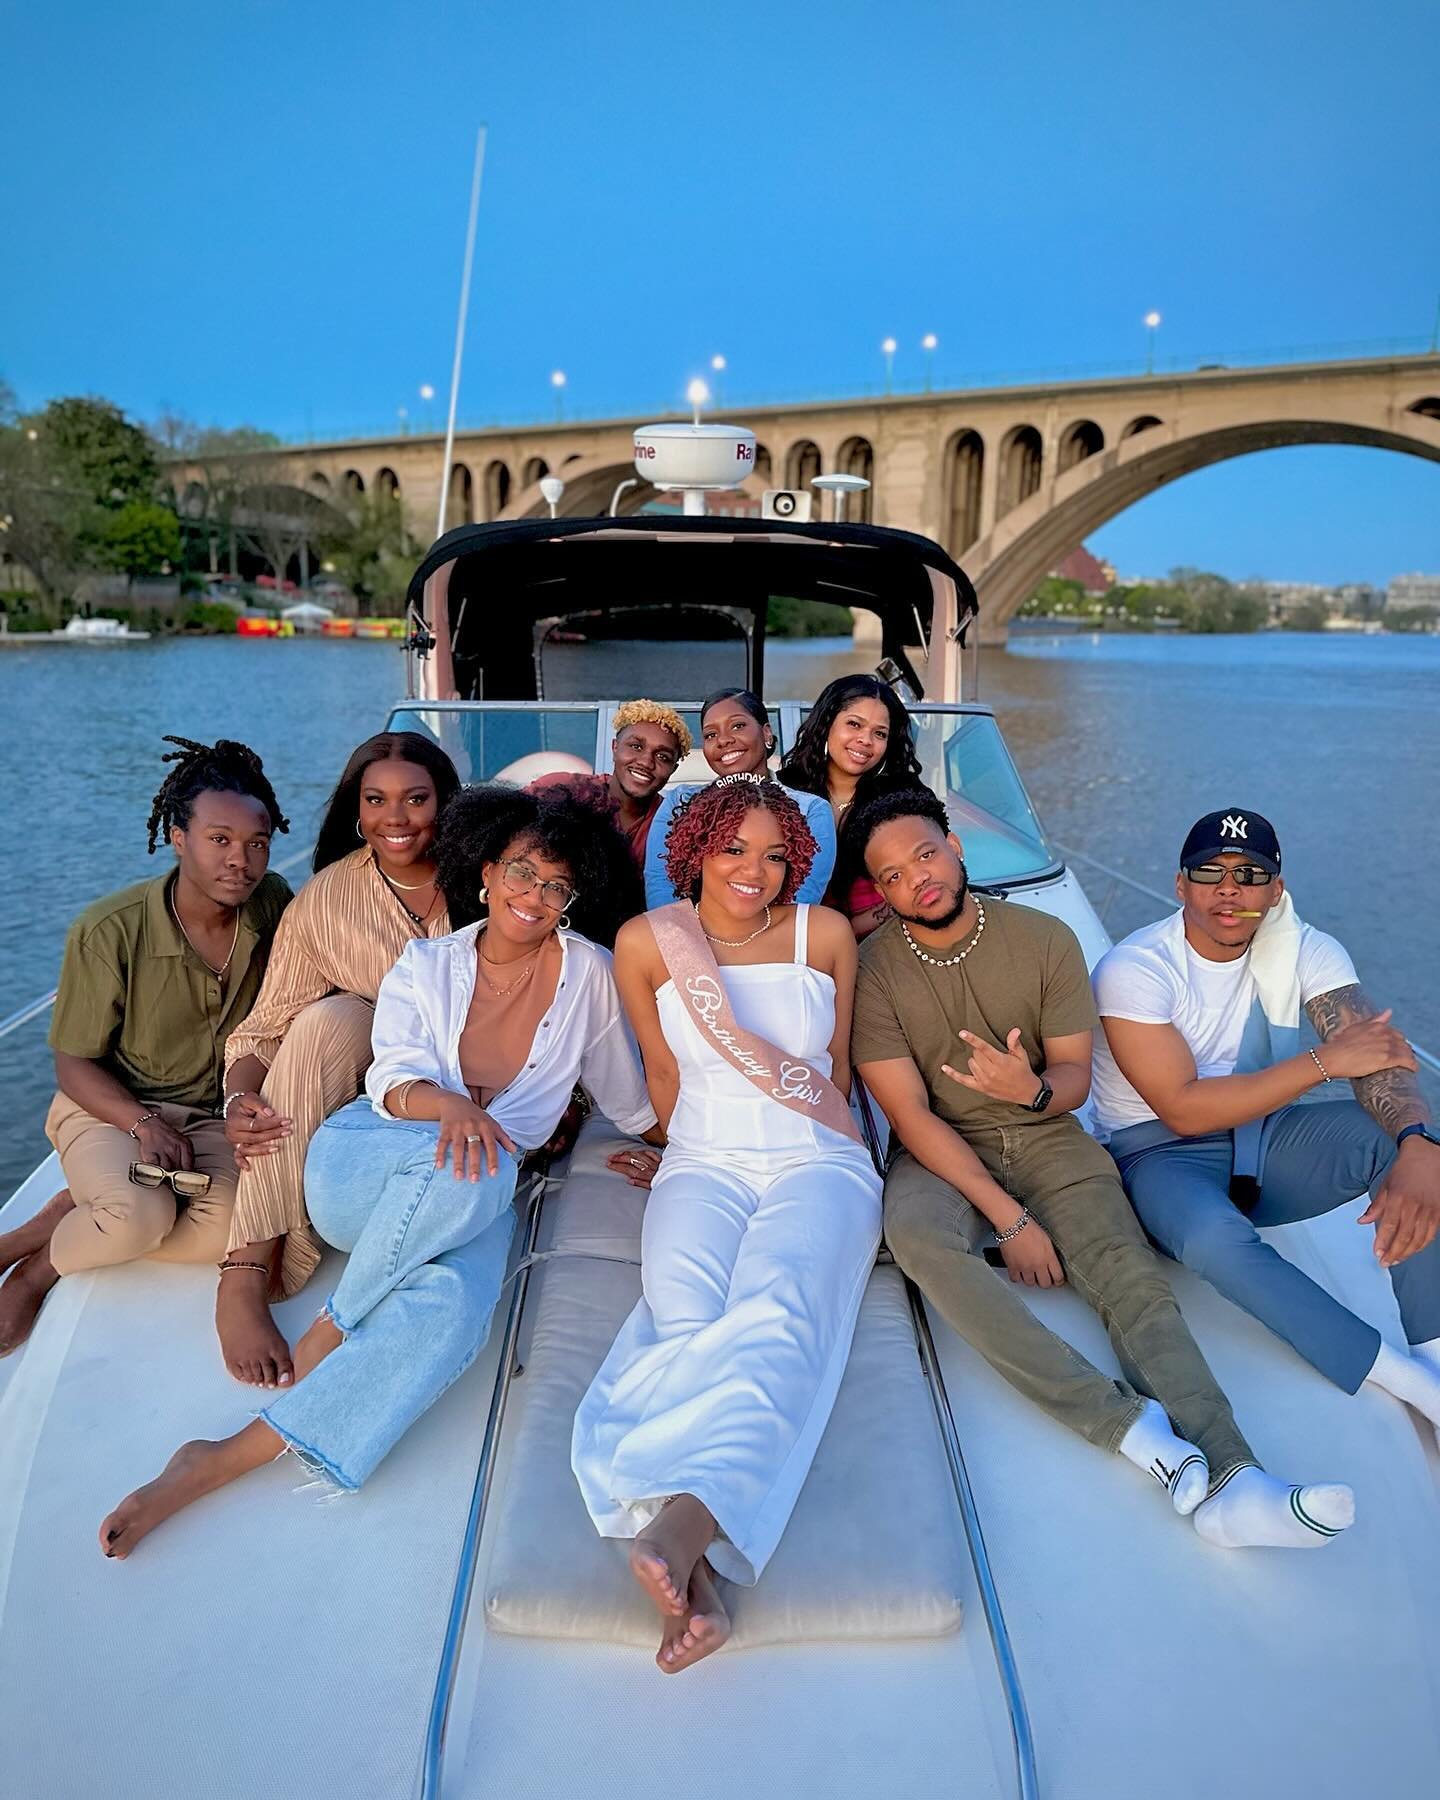 Throwback Thursday to our 1st charter of the season with Ashley and her crew!💞✨

The weather is heating up and dates are booking fast! Click the link in the bio to make your reservation to drop anchor with the Mahogany Team today! ⚓️🛥️

#myc #mahog